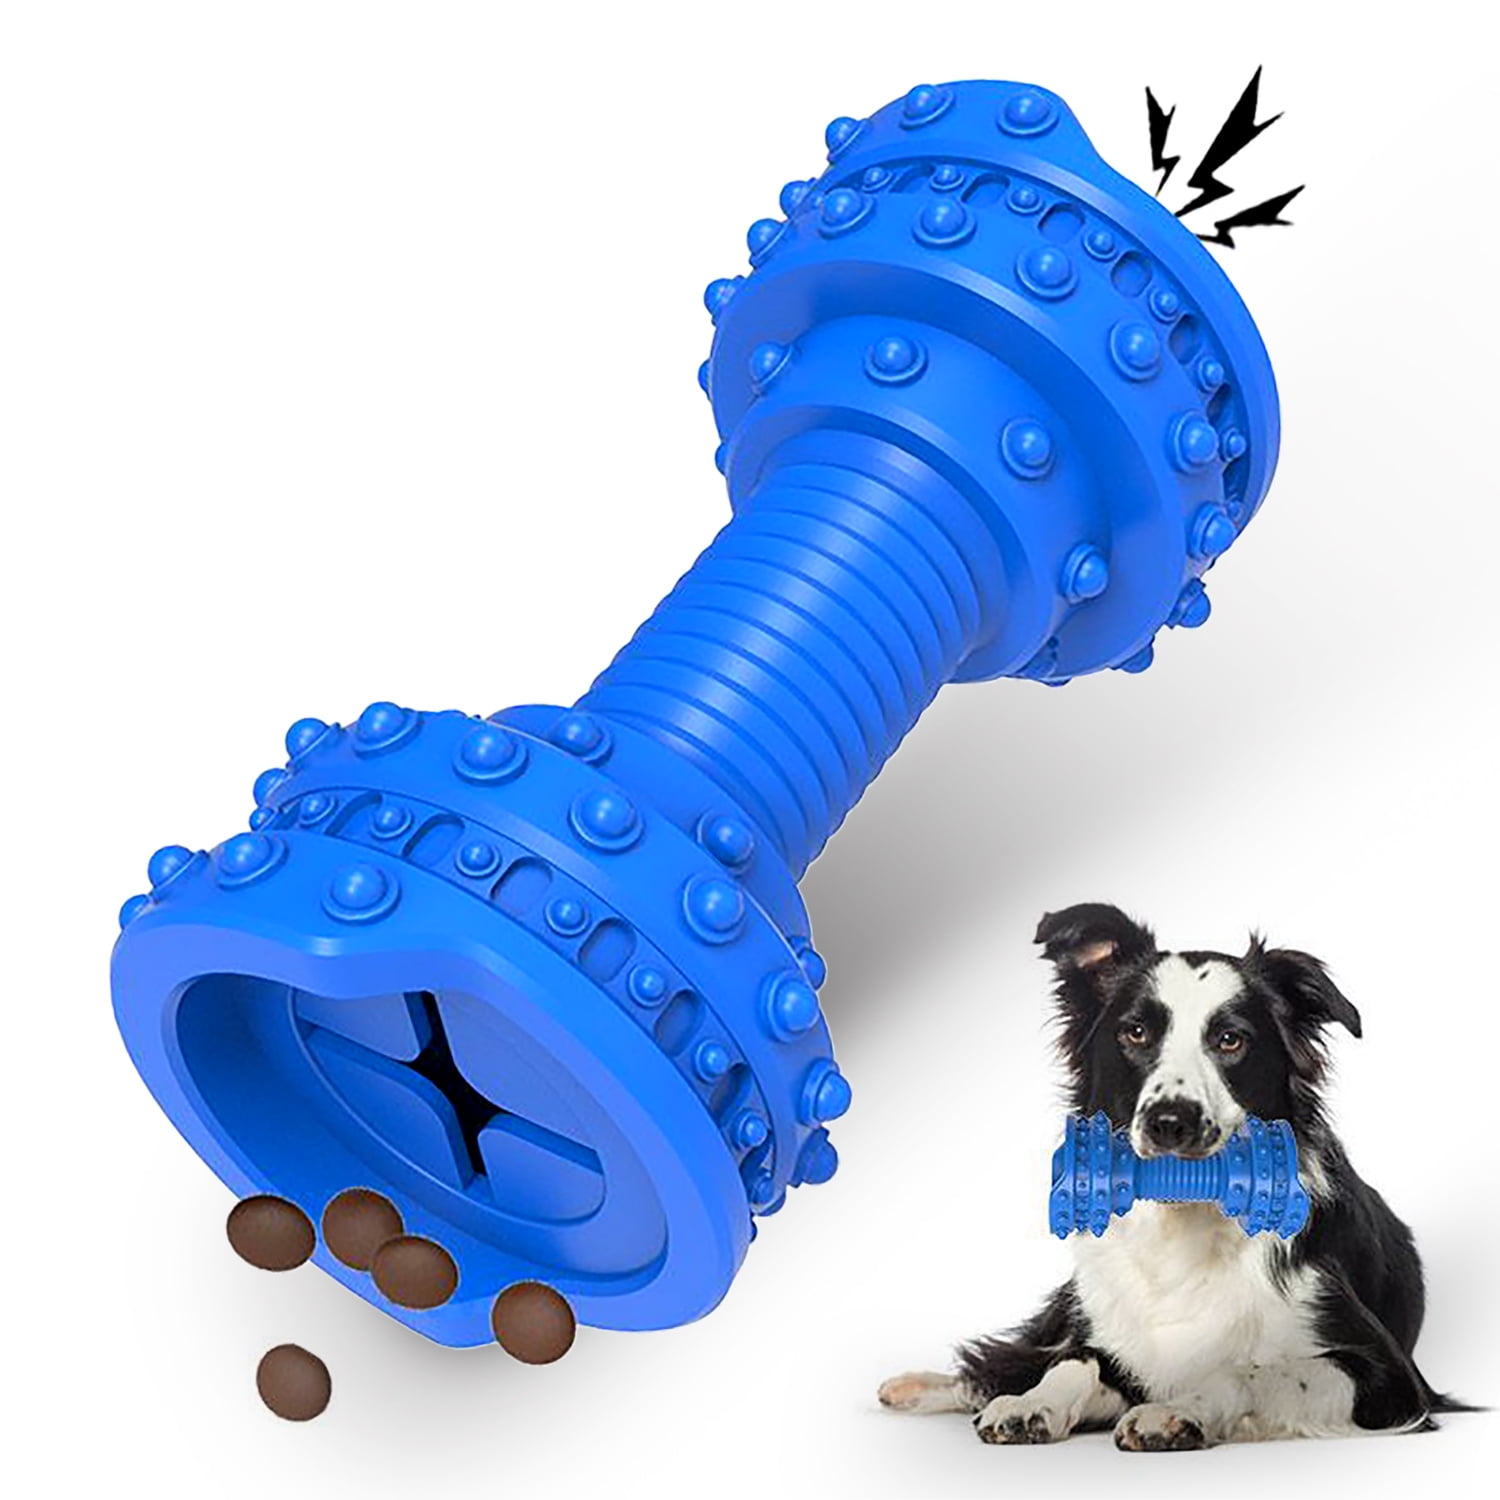 8 Best Indestructible Dog Toys For Tough Dogs (1000+ Tested) - Dog Lab